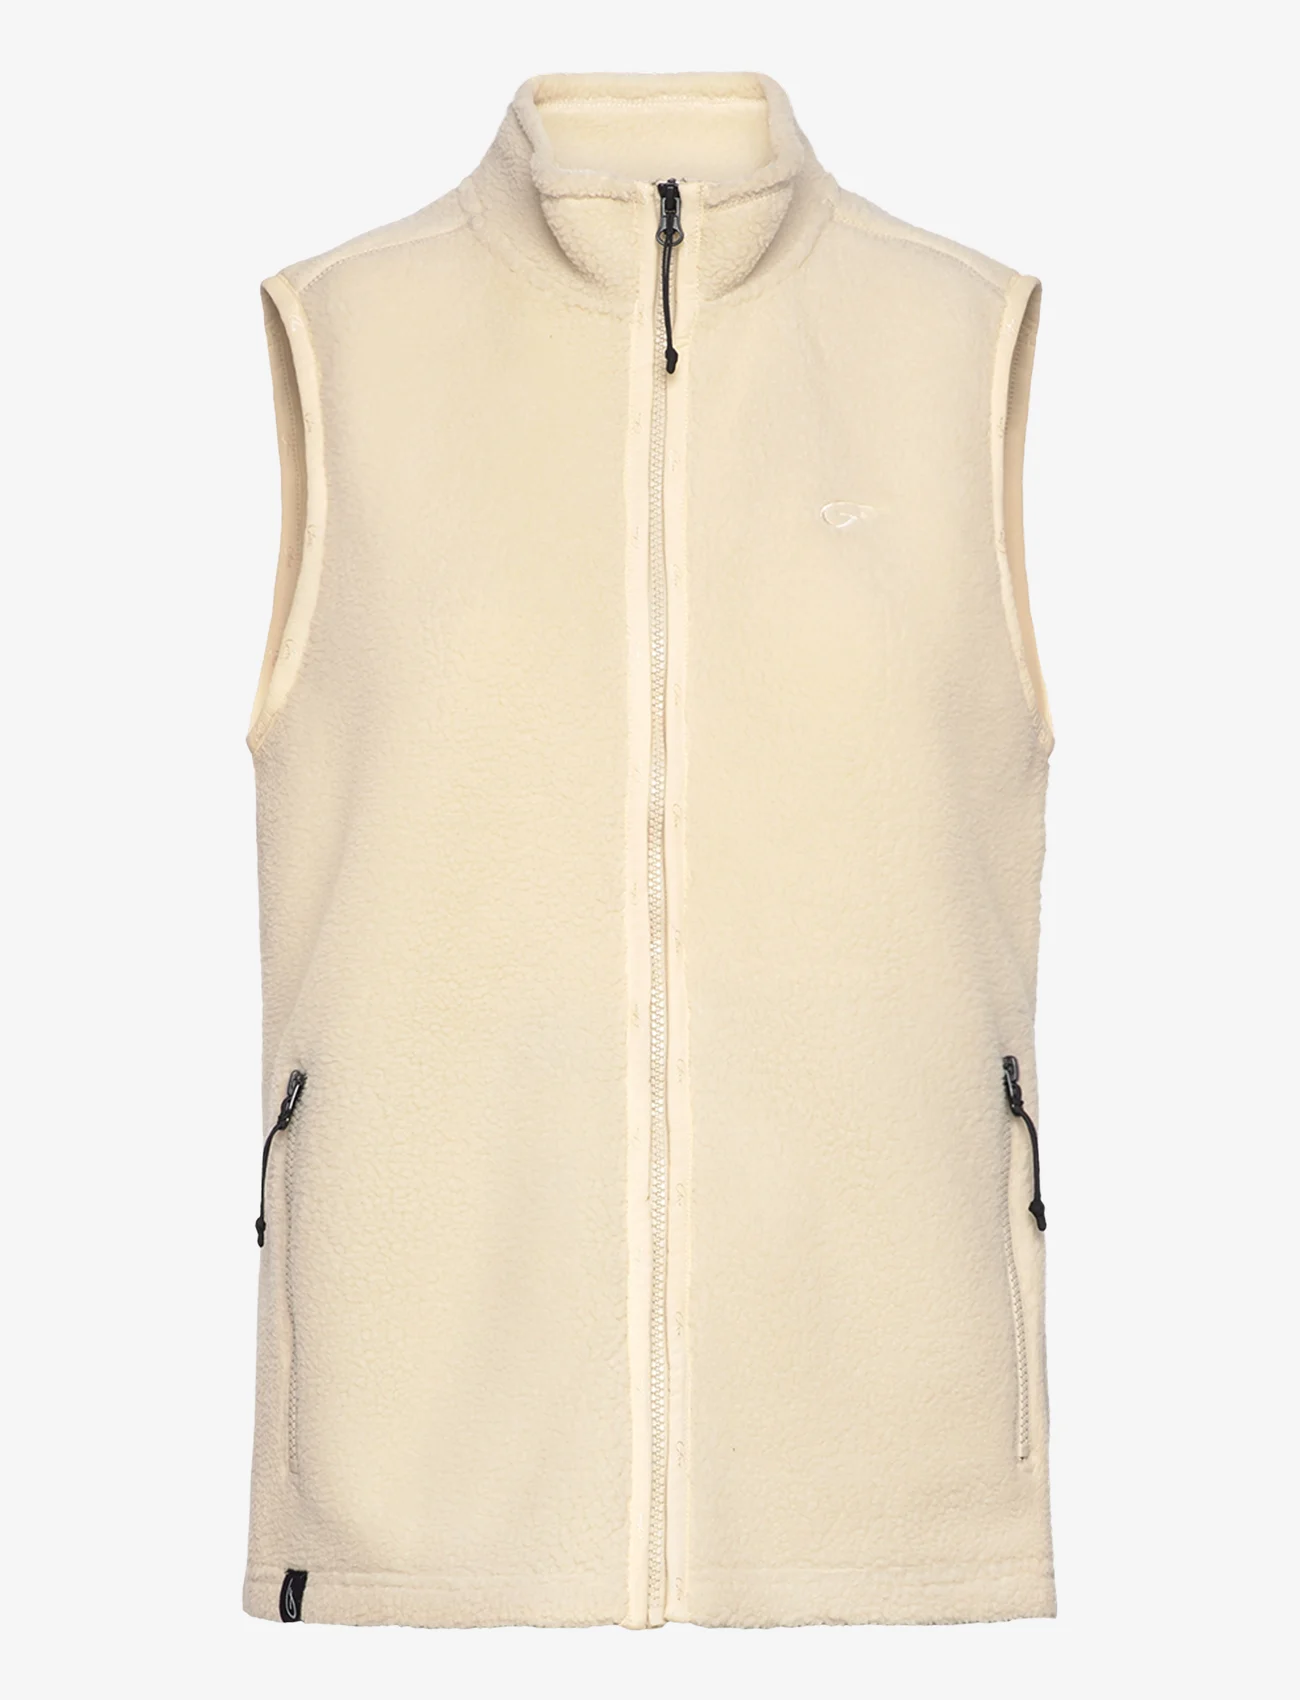 Five Seasons - SUNNDAL VEST W - quilted vests - oyster gray - 0